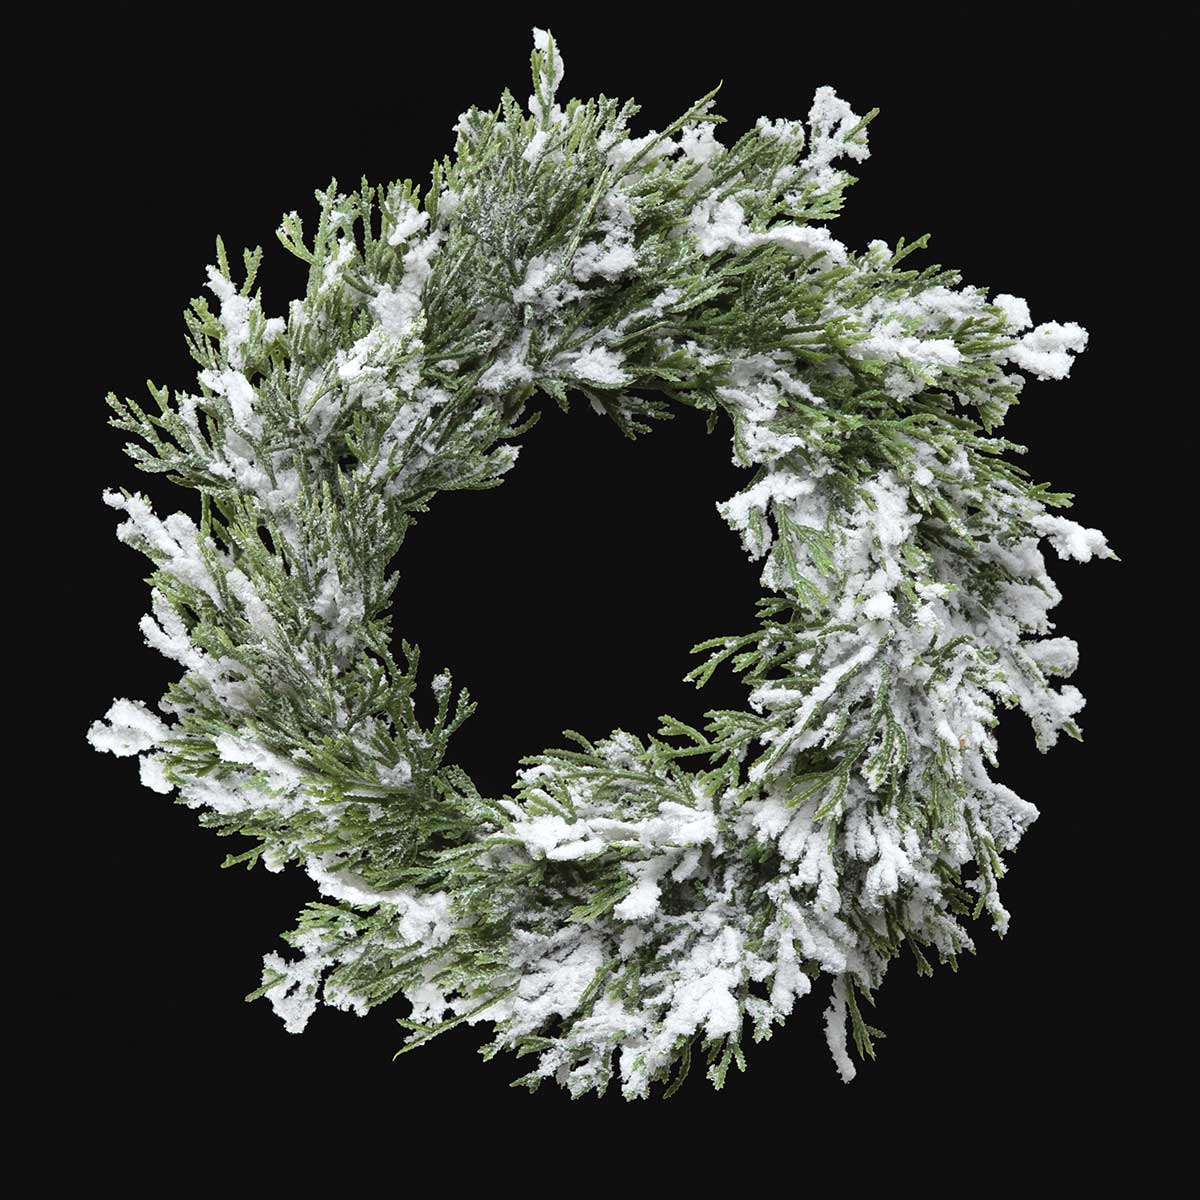 CANDLE RING SNOWED CONIFER PINE 9IN (INNER RING 5IN) GREEN